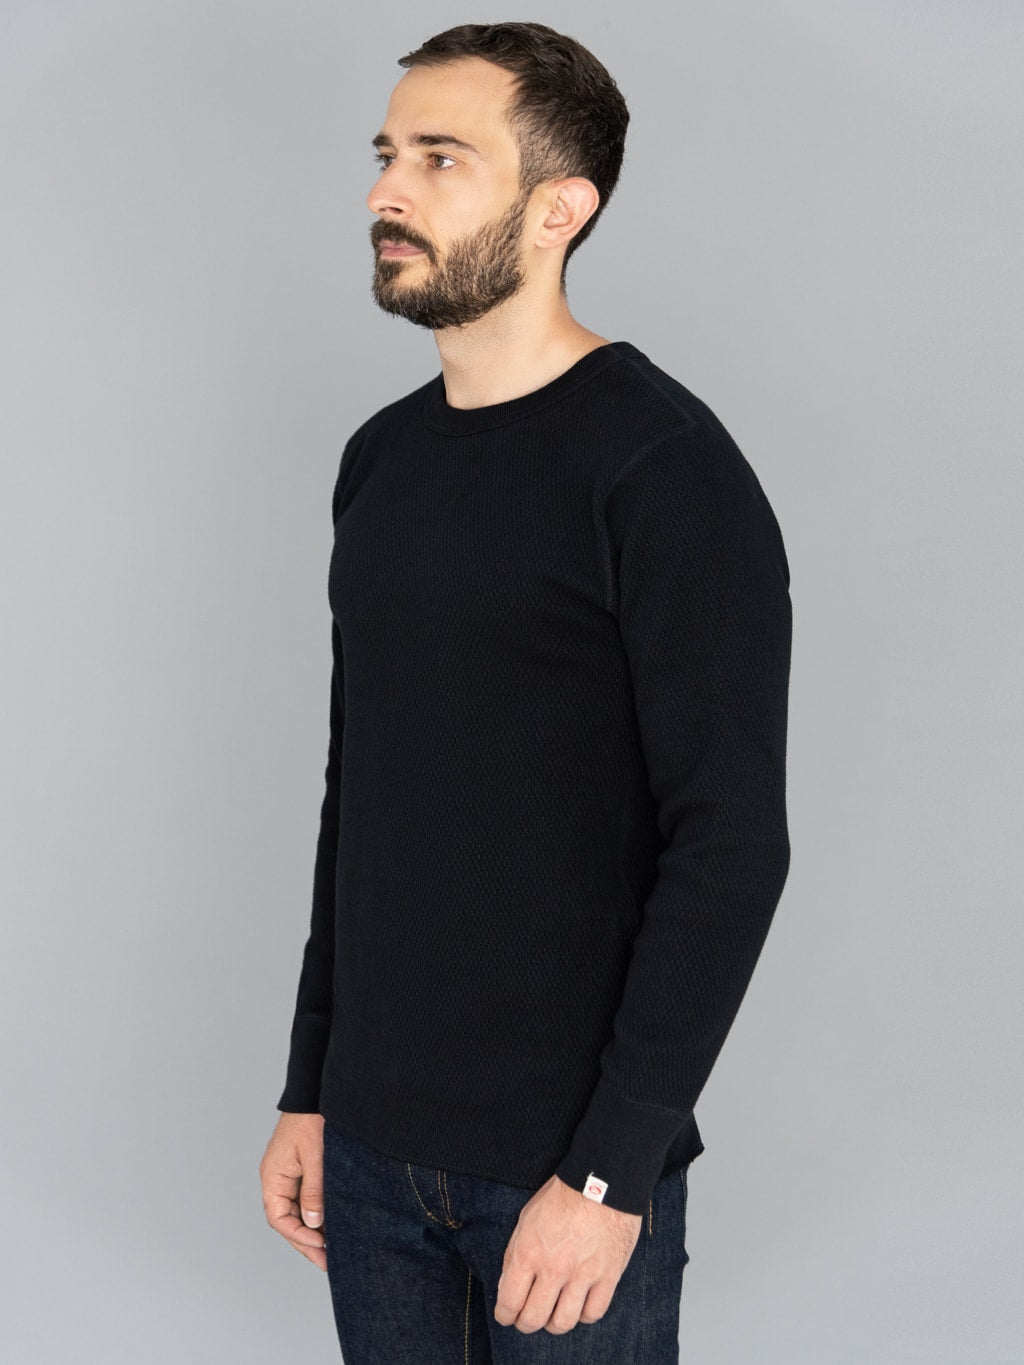 UES Double Honeycomb Thermal TShirt Black model back fit